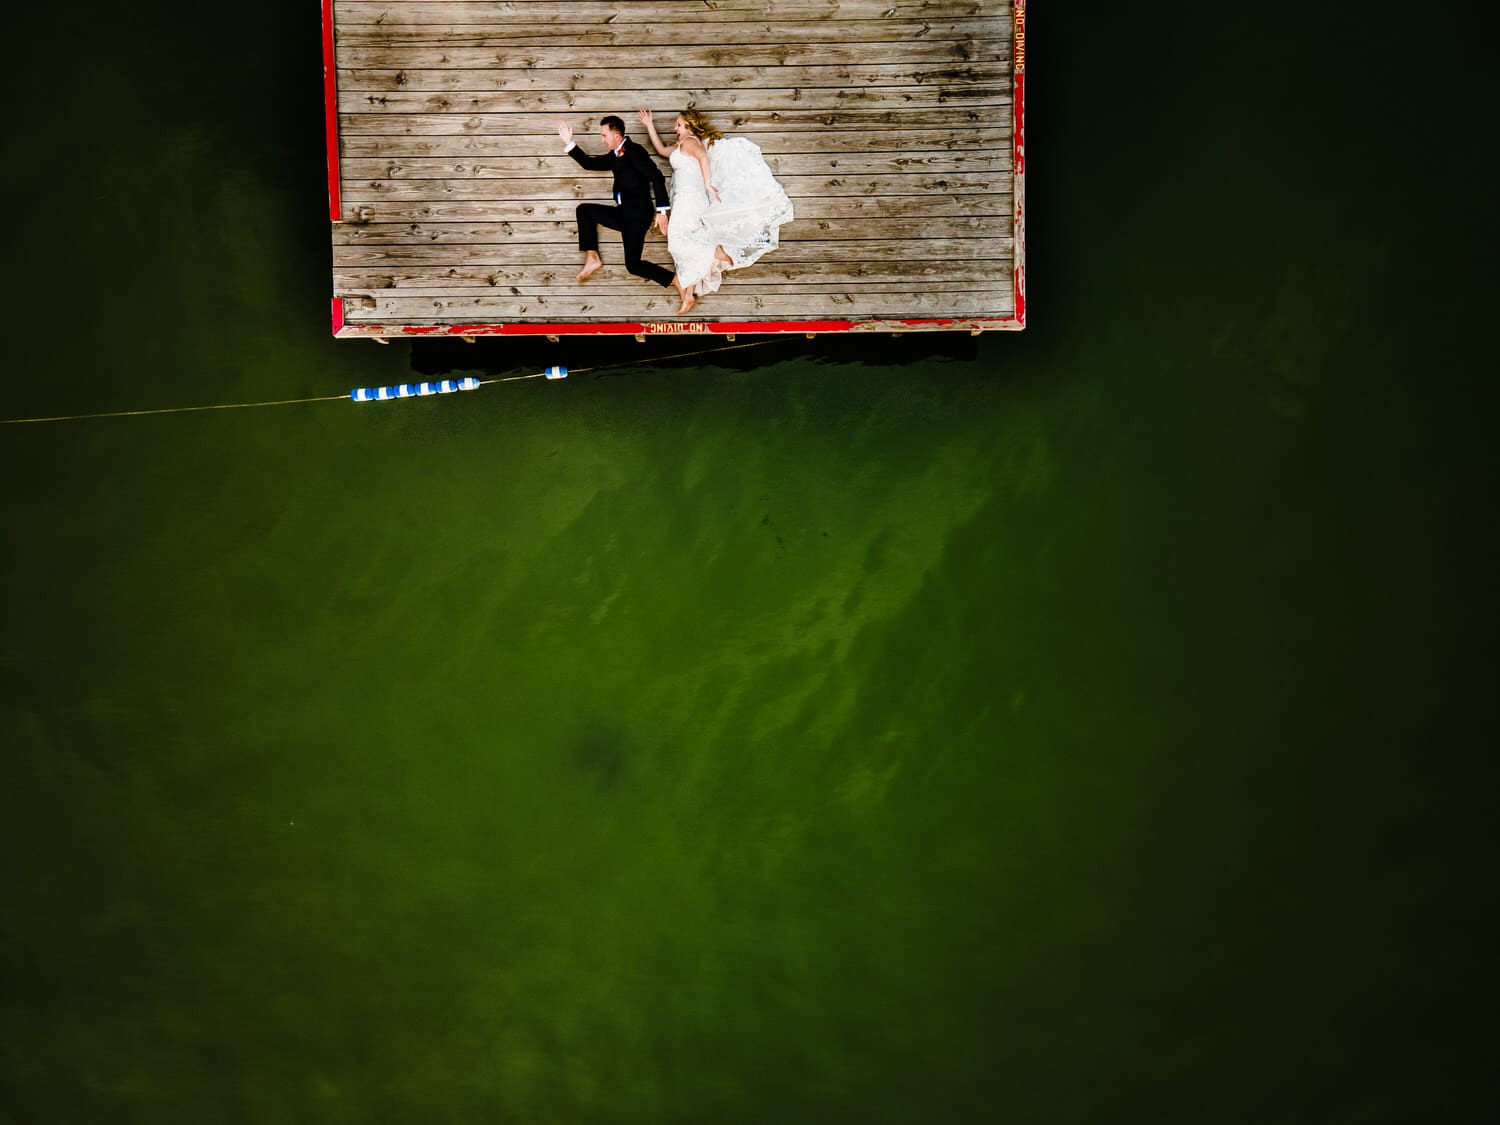 A colorful, candid portrait taken from above of a bride and groom "running" on a dock" after their wedding in Kansas City. 